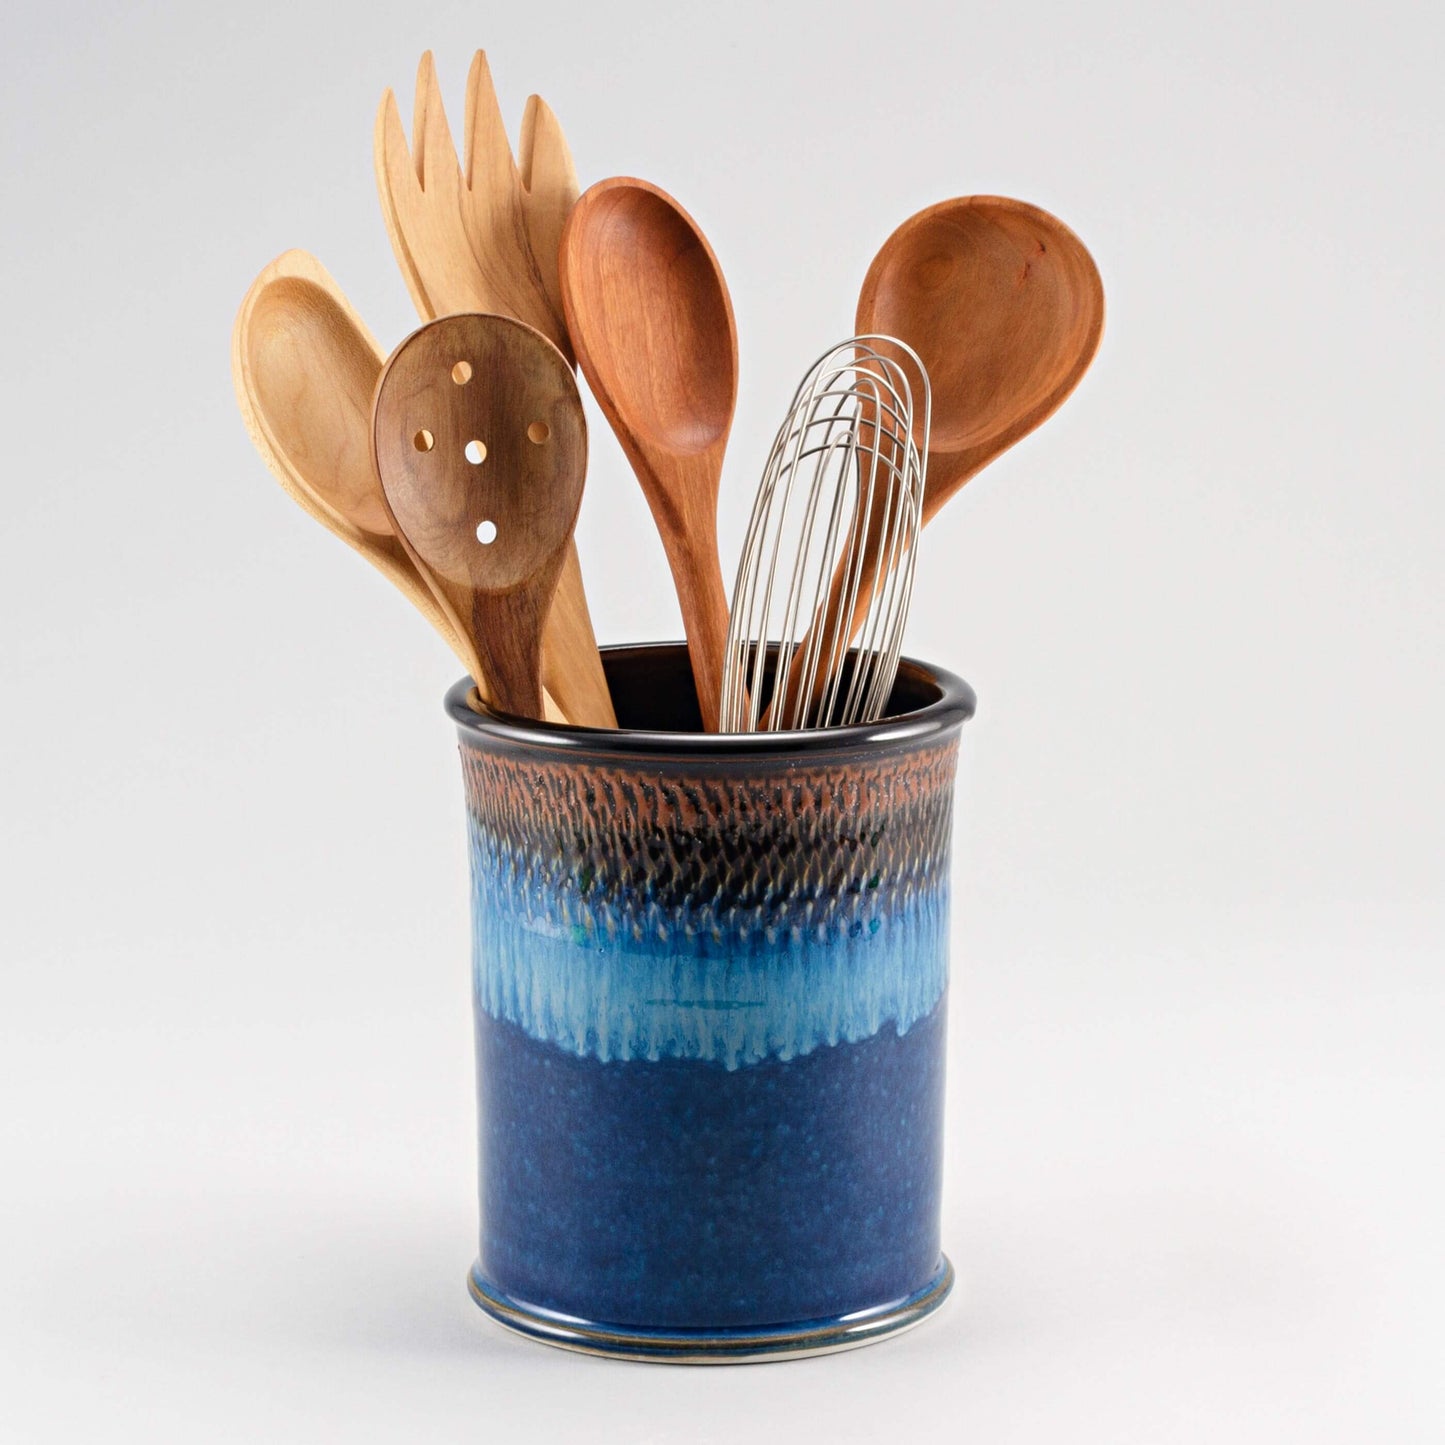 Handmade Pottery Utensil Holder in Blue Hamada pattern made by Georgetown Pottery in Maine